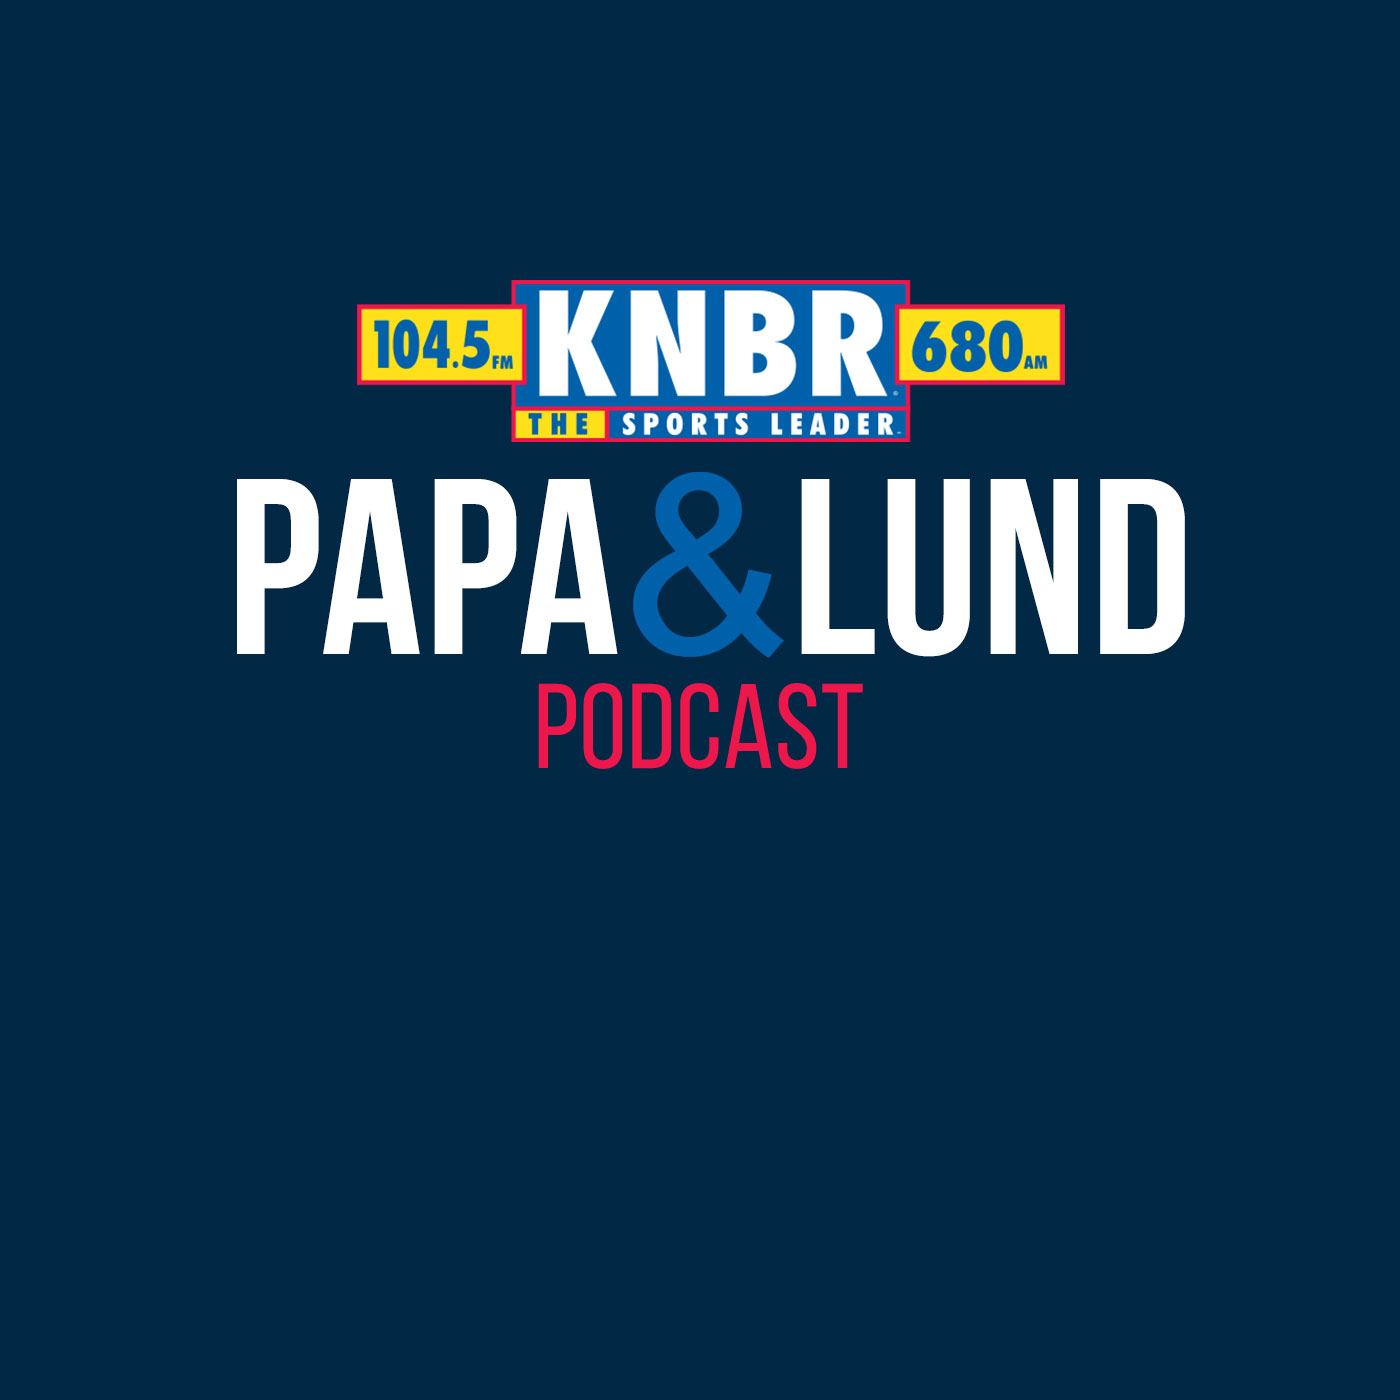 4-11 Marc Spears joins Papa & Lund to discuss the battle for Northern California between the Warriors and Kings and details what matchups to look out for